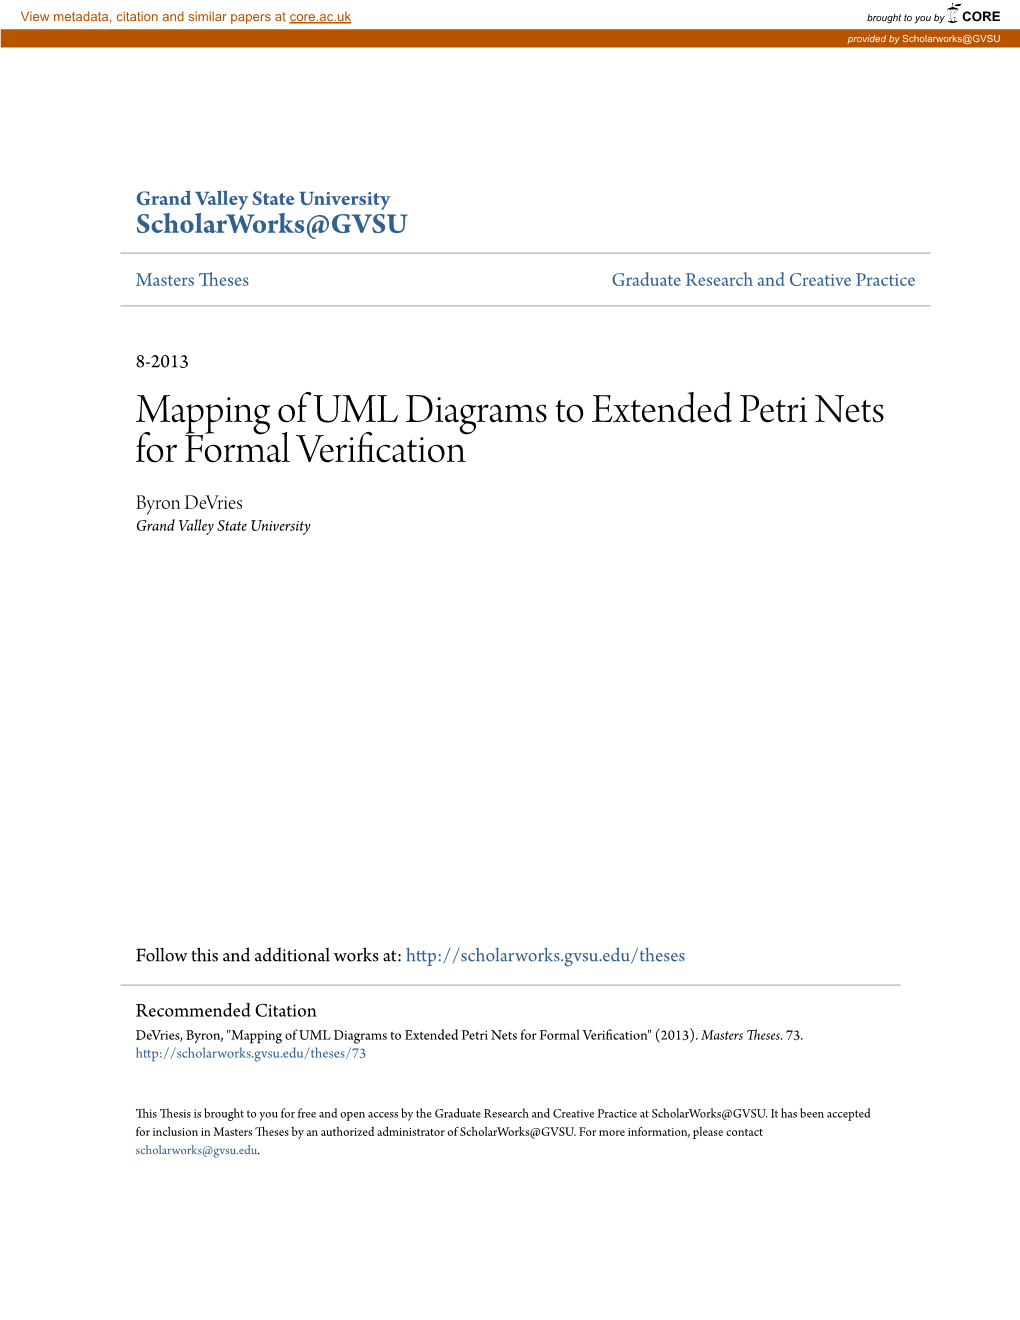 Mapping of UML Diagrams to Extended Petri Nets for Formal Verification Byron Devries Grand Valley State University